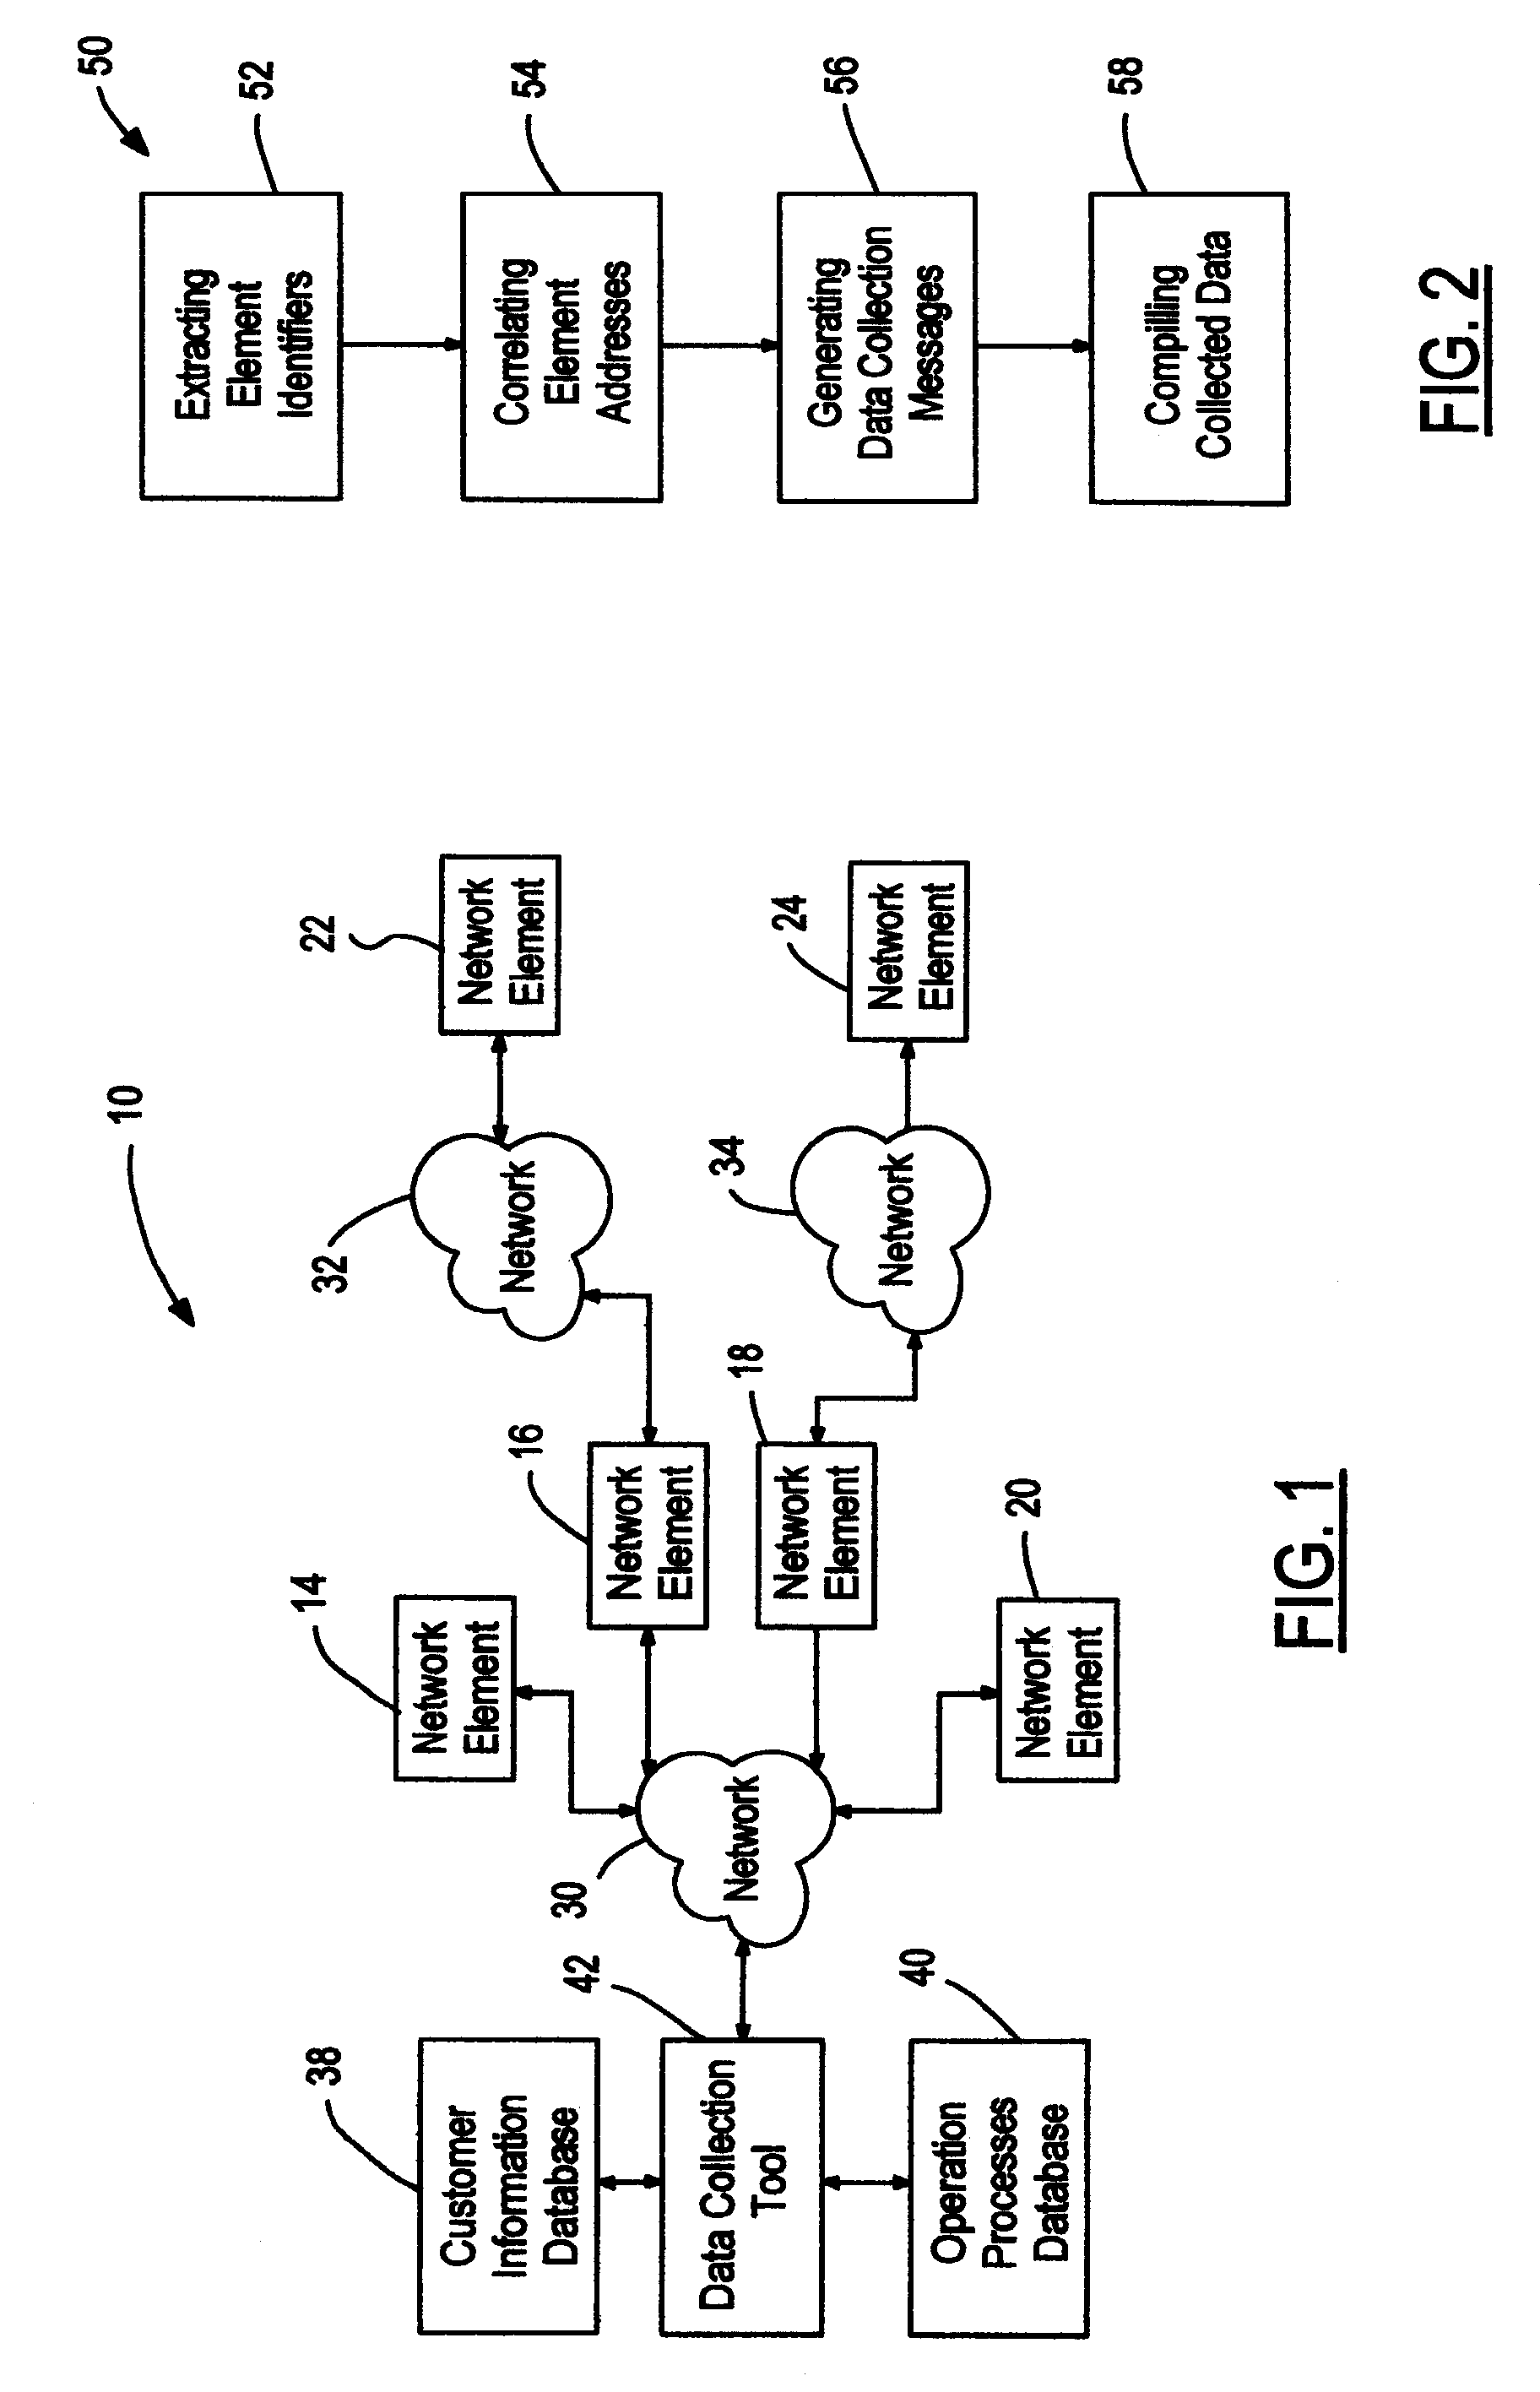 Method of collecting data from network elements